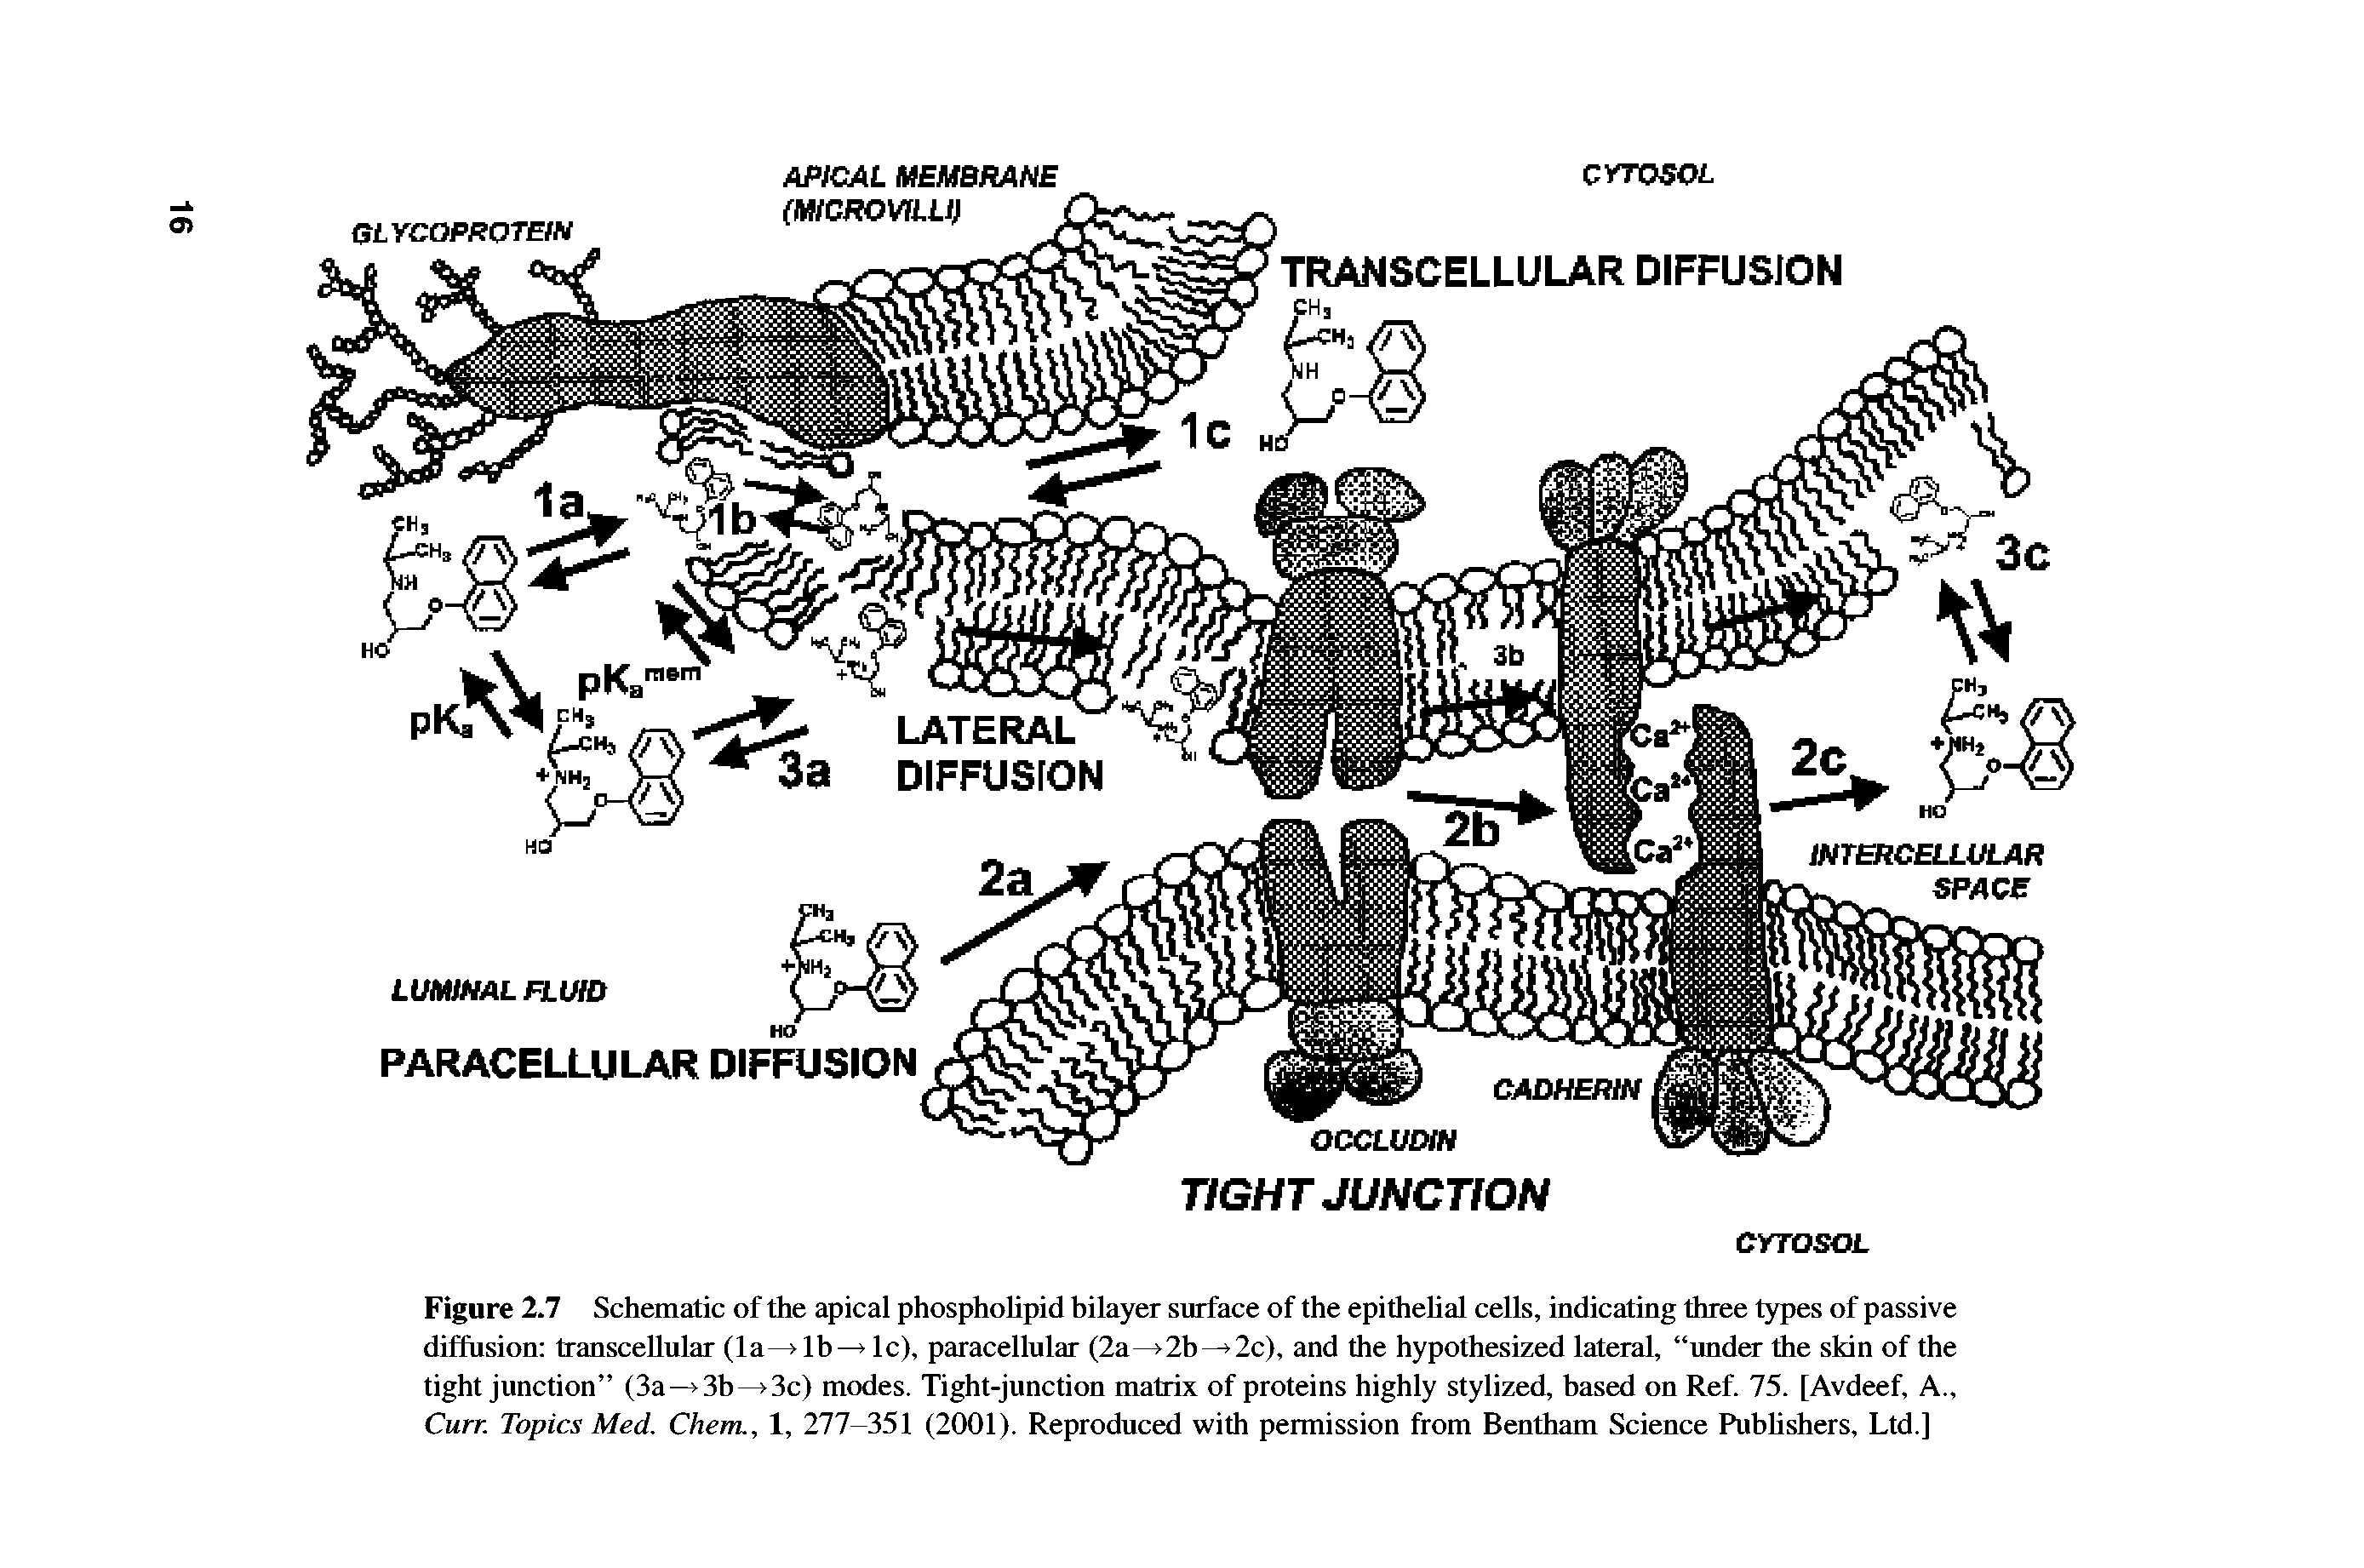 Figure 2.7 Schematic of the apical phospholipid hilayer surface of the epithelial cells, indicating three types of passive diffusion transcellular (la > 1 b 1 c), paracellular (2a >2b 2c), and the hypothesized lateral, under the skin of the tight junction (3a—> 3b—> 3c) modes. Tight-junction matrix of proteins highly stylized, based on Ref. 75. [Avdeef, A., Curr. Topics Med. Chem., 1, 277-351 (2001). Reproduced with permission from Bentham Science Publishers, Ltd.]...